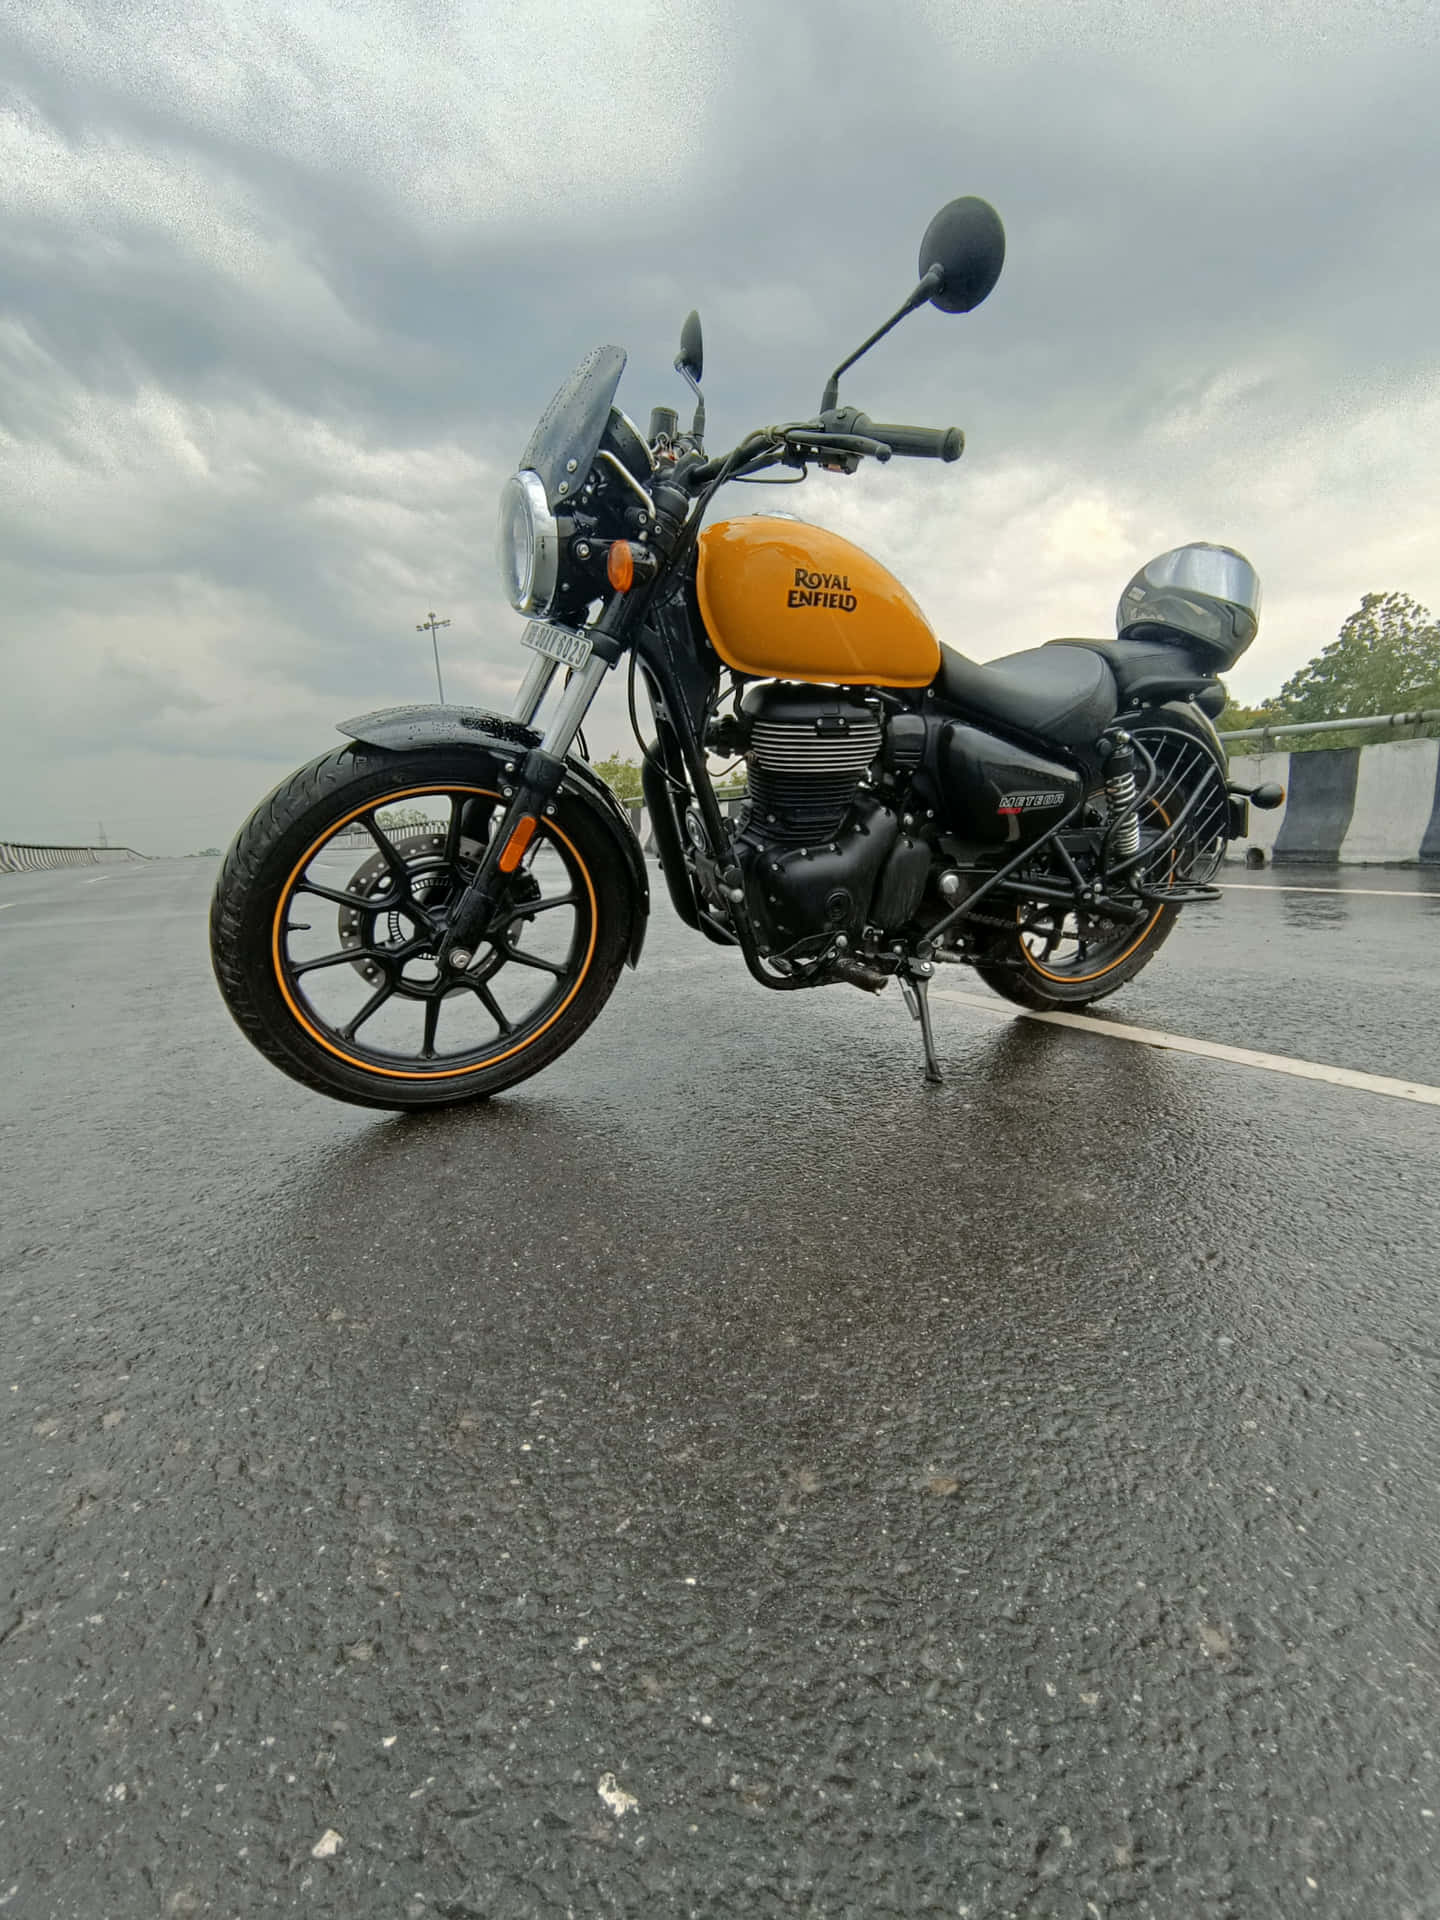 Feel the thrum of the road with a Royal Enfield Bullet